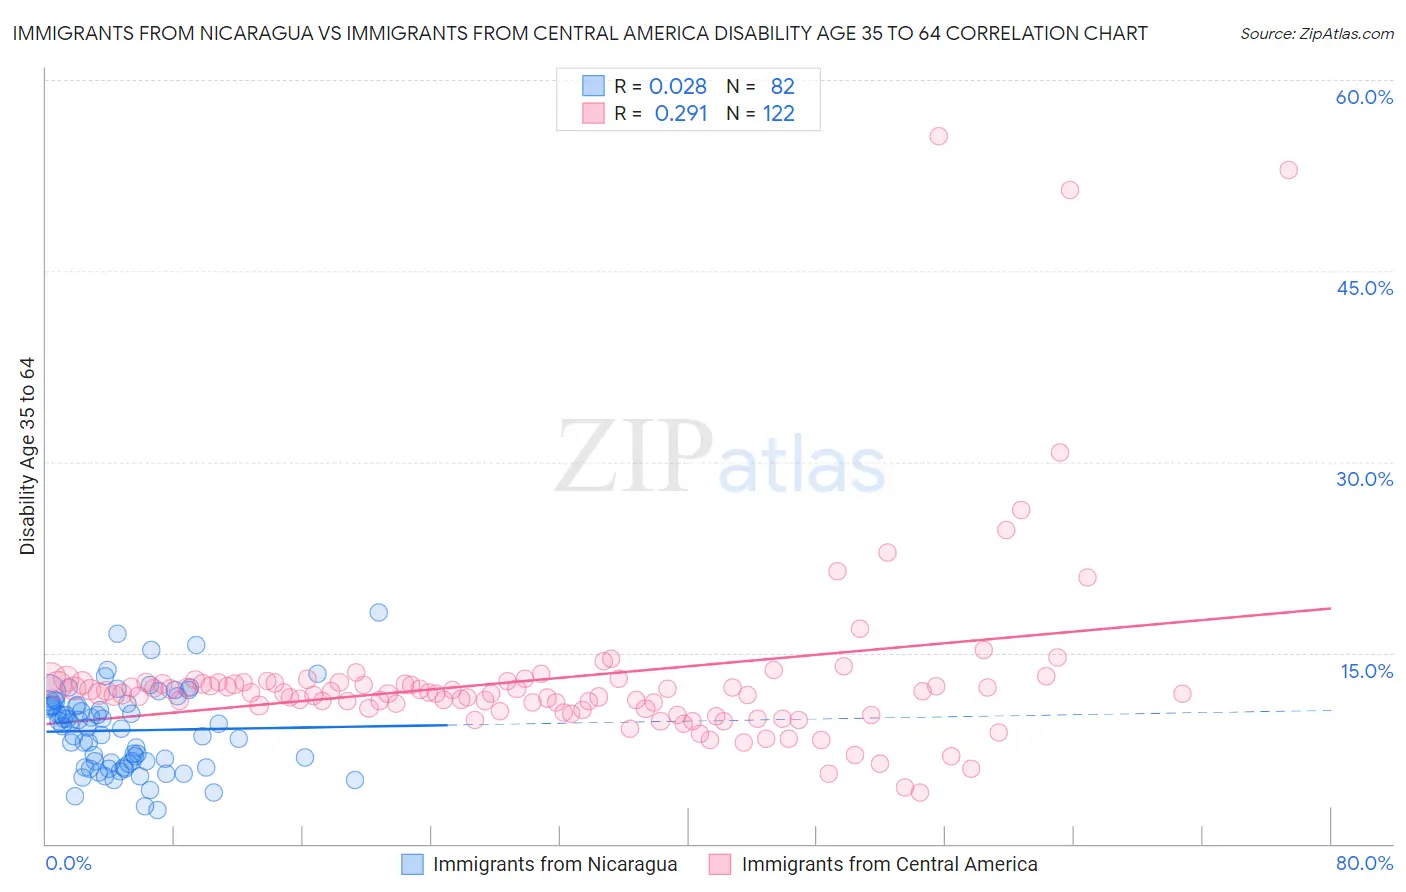 Immigrants from Nicaragua vs Immigrants from Central America Disability Age 35 to 64